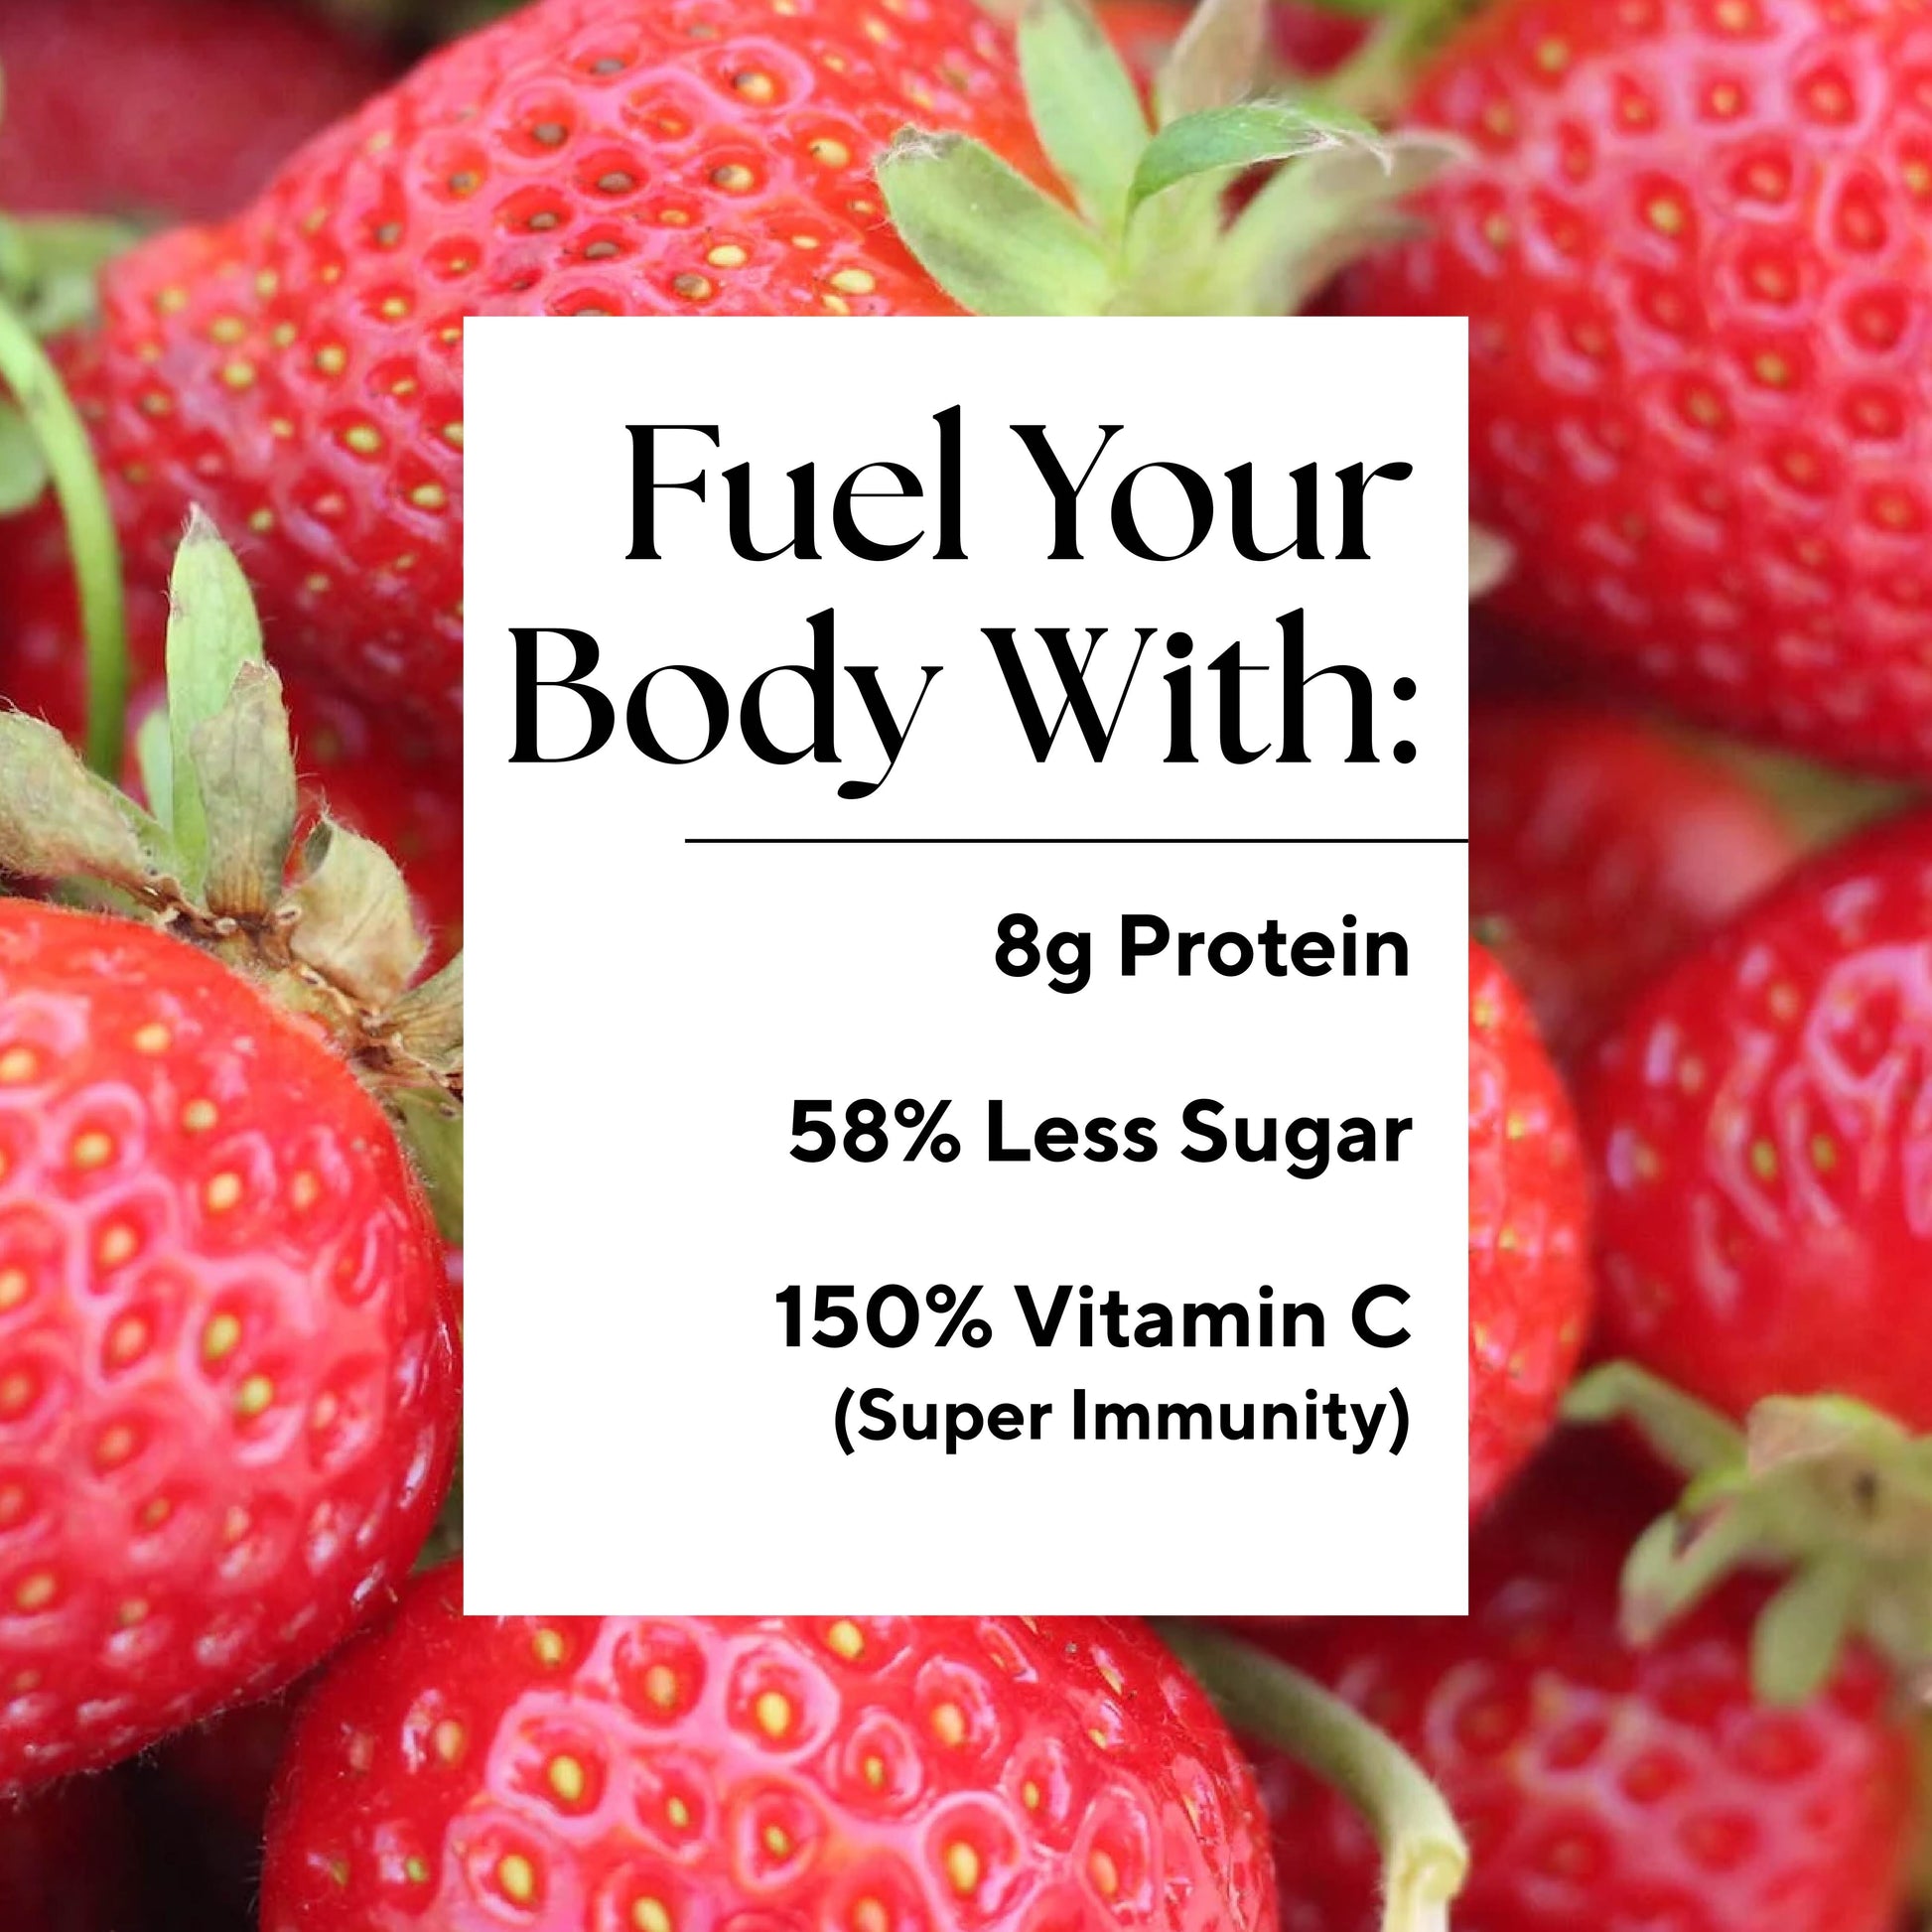 Infographic that reads: "Fuel your body with: 8g Protein, 58% Less Sugar, 150% Vitamin C (Super Immunity)"